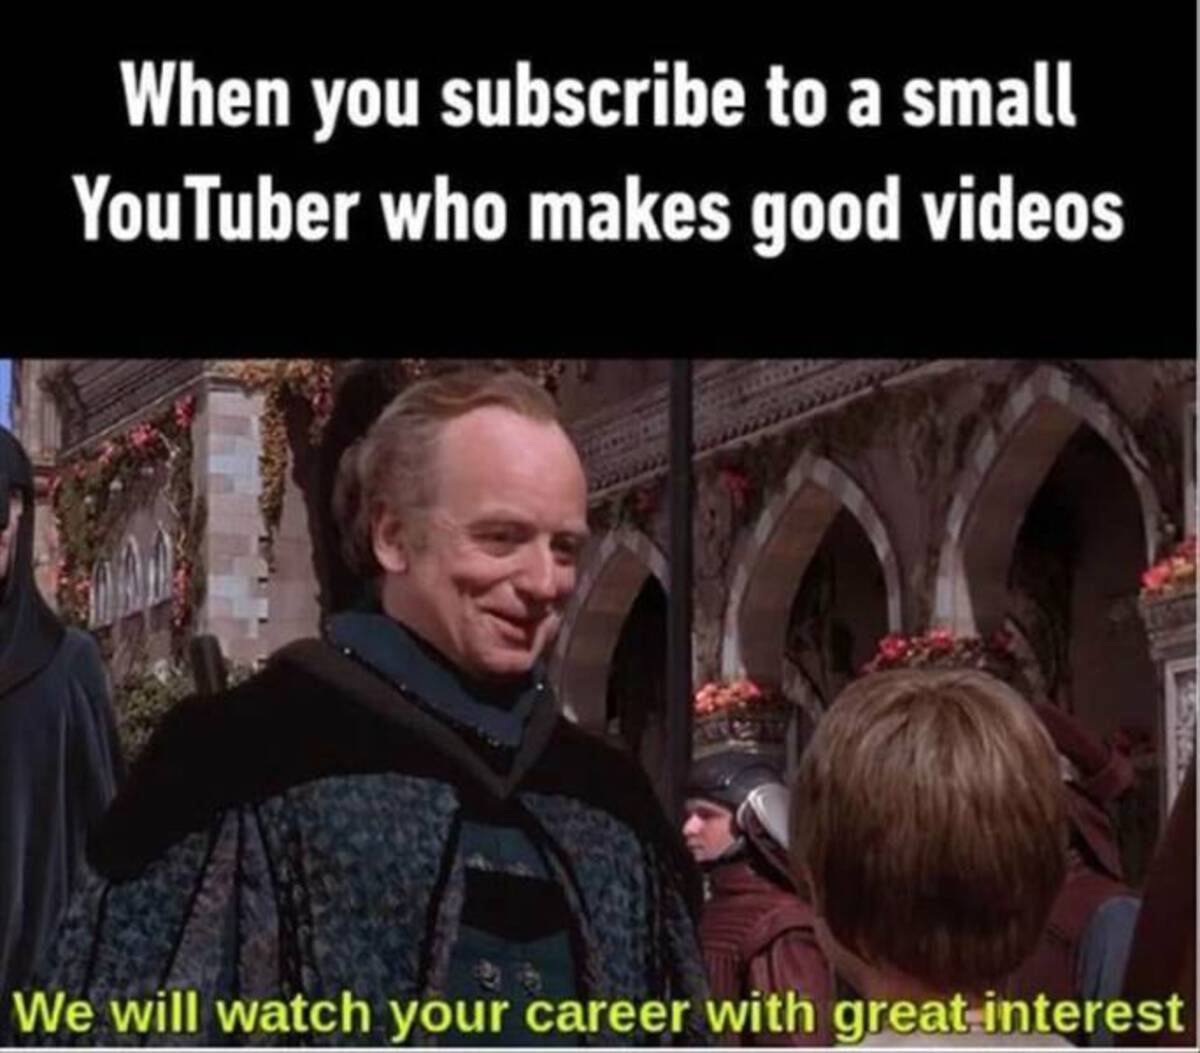 we will watch your career with great interest - When you subscribe to a small YouTuber who makes good videos We will watch your career with great interest